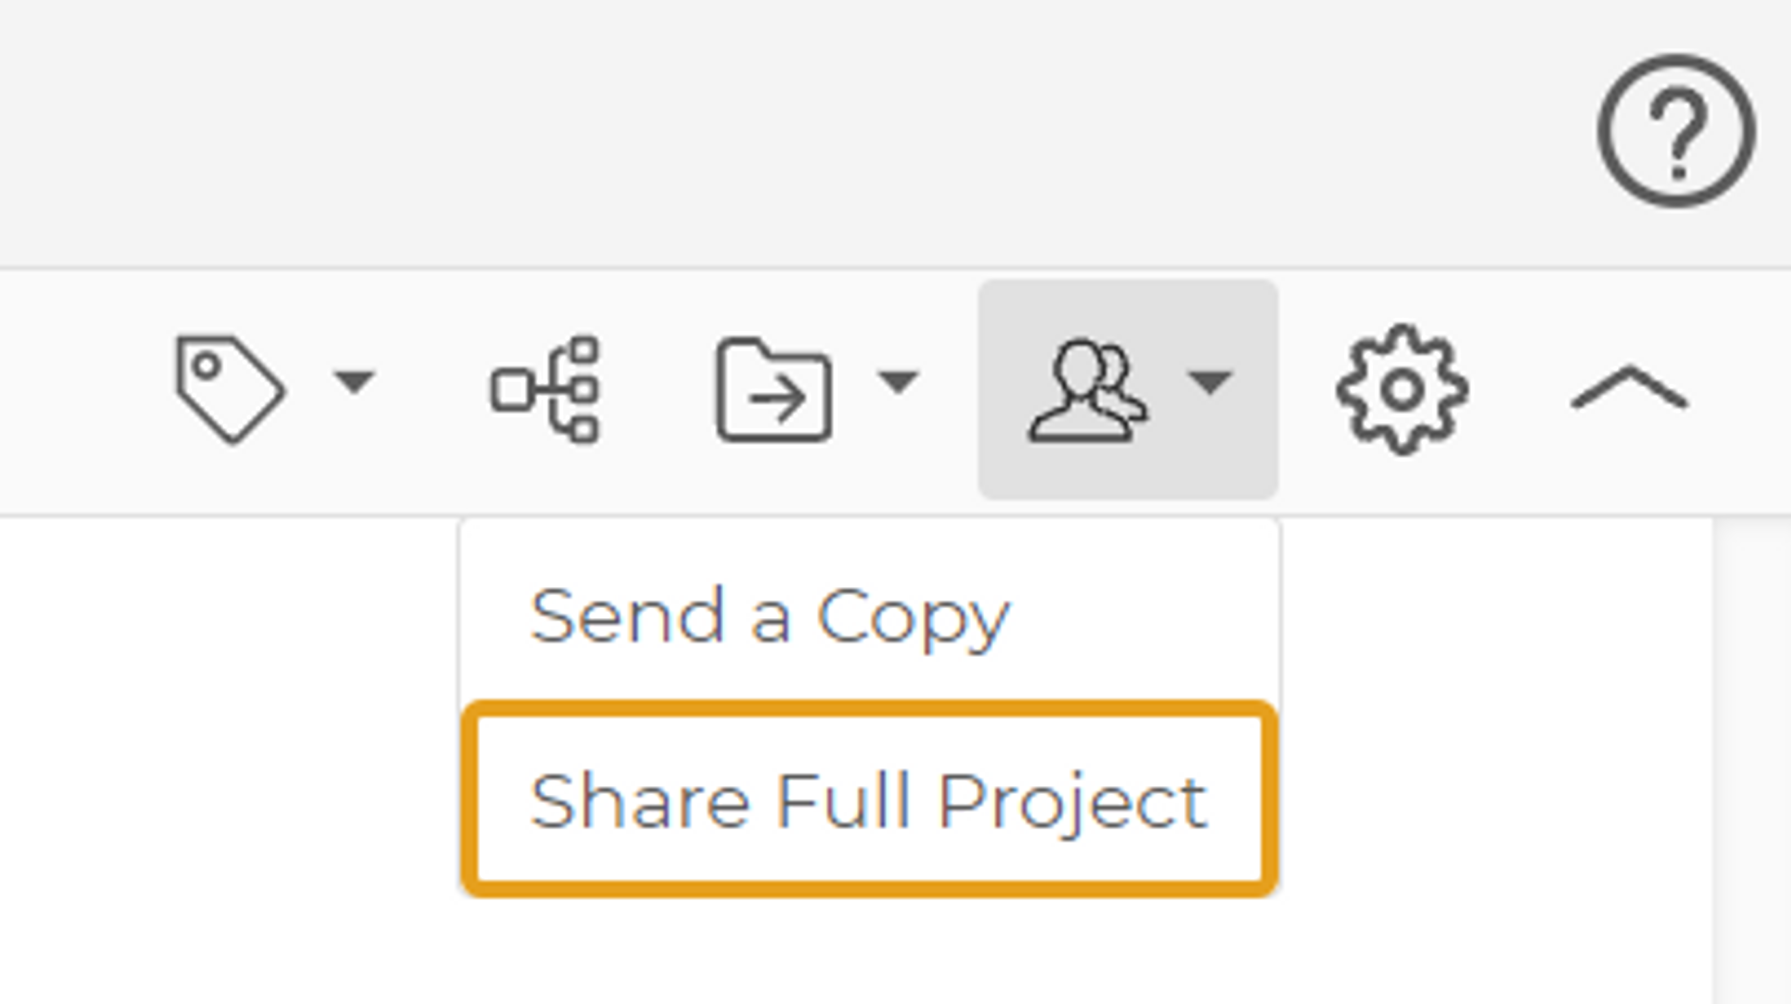 Select "share full project" from dropdown.